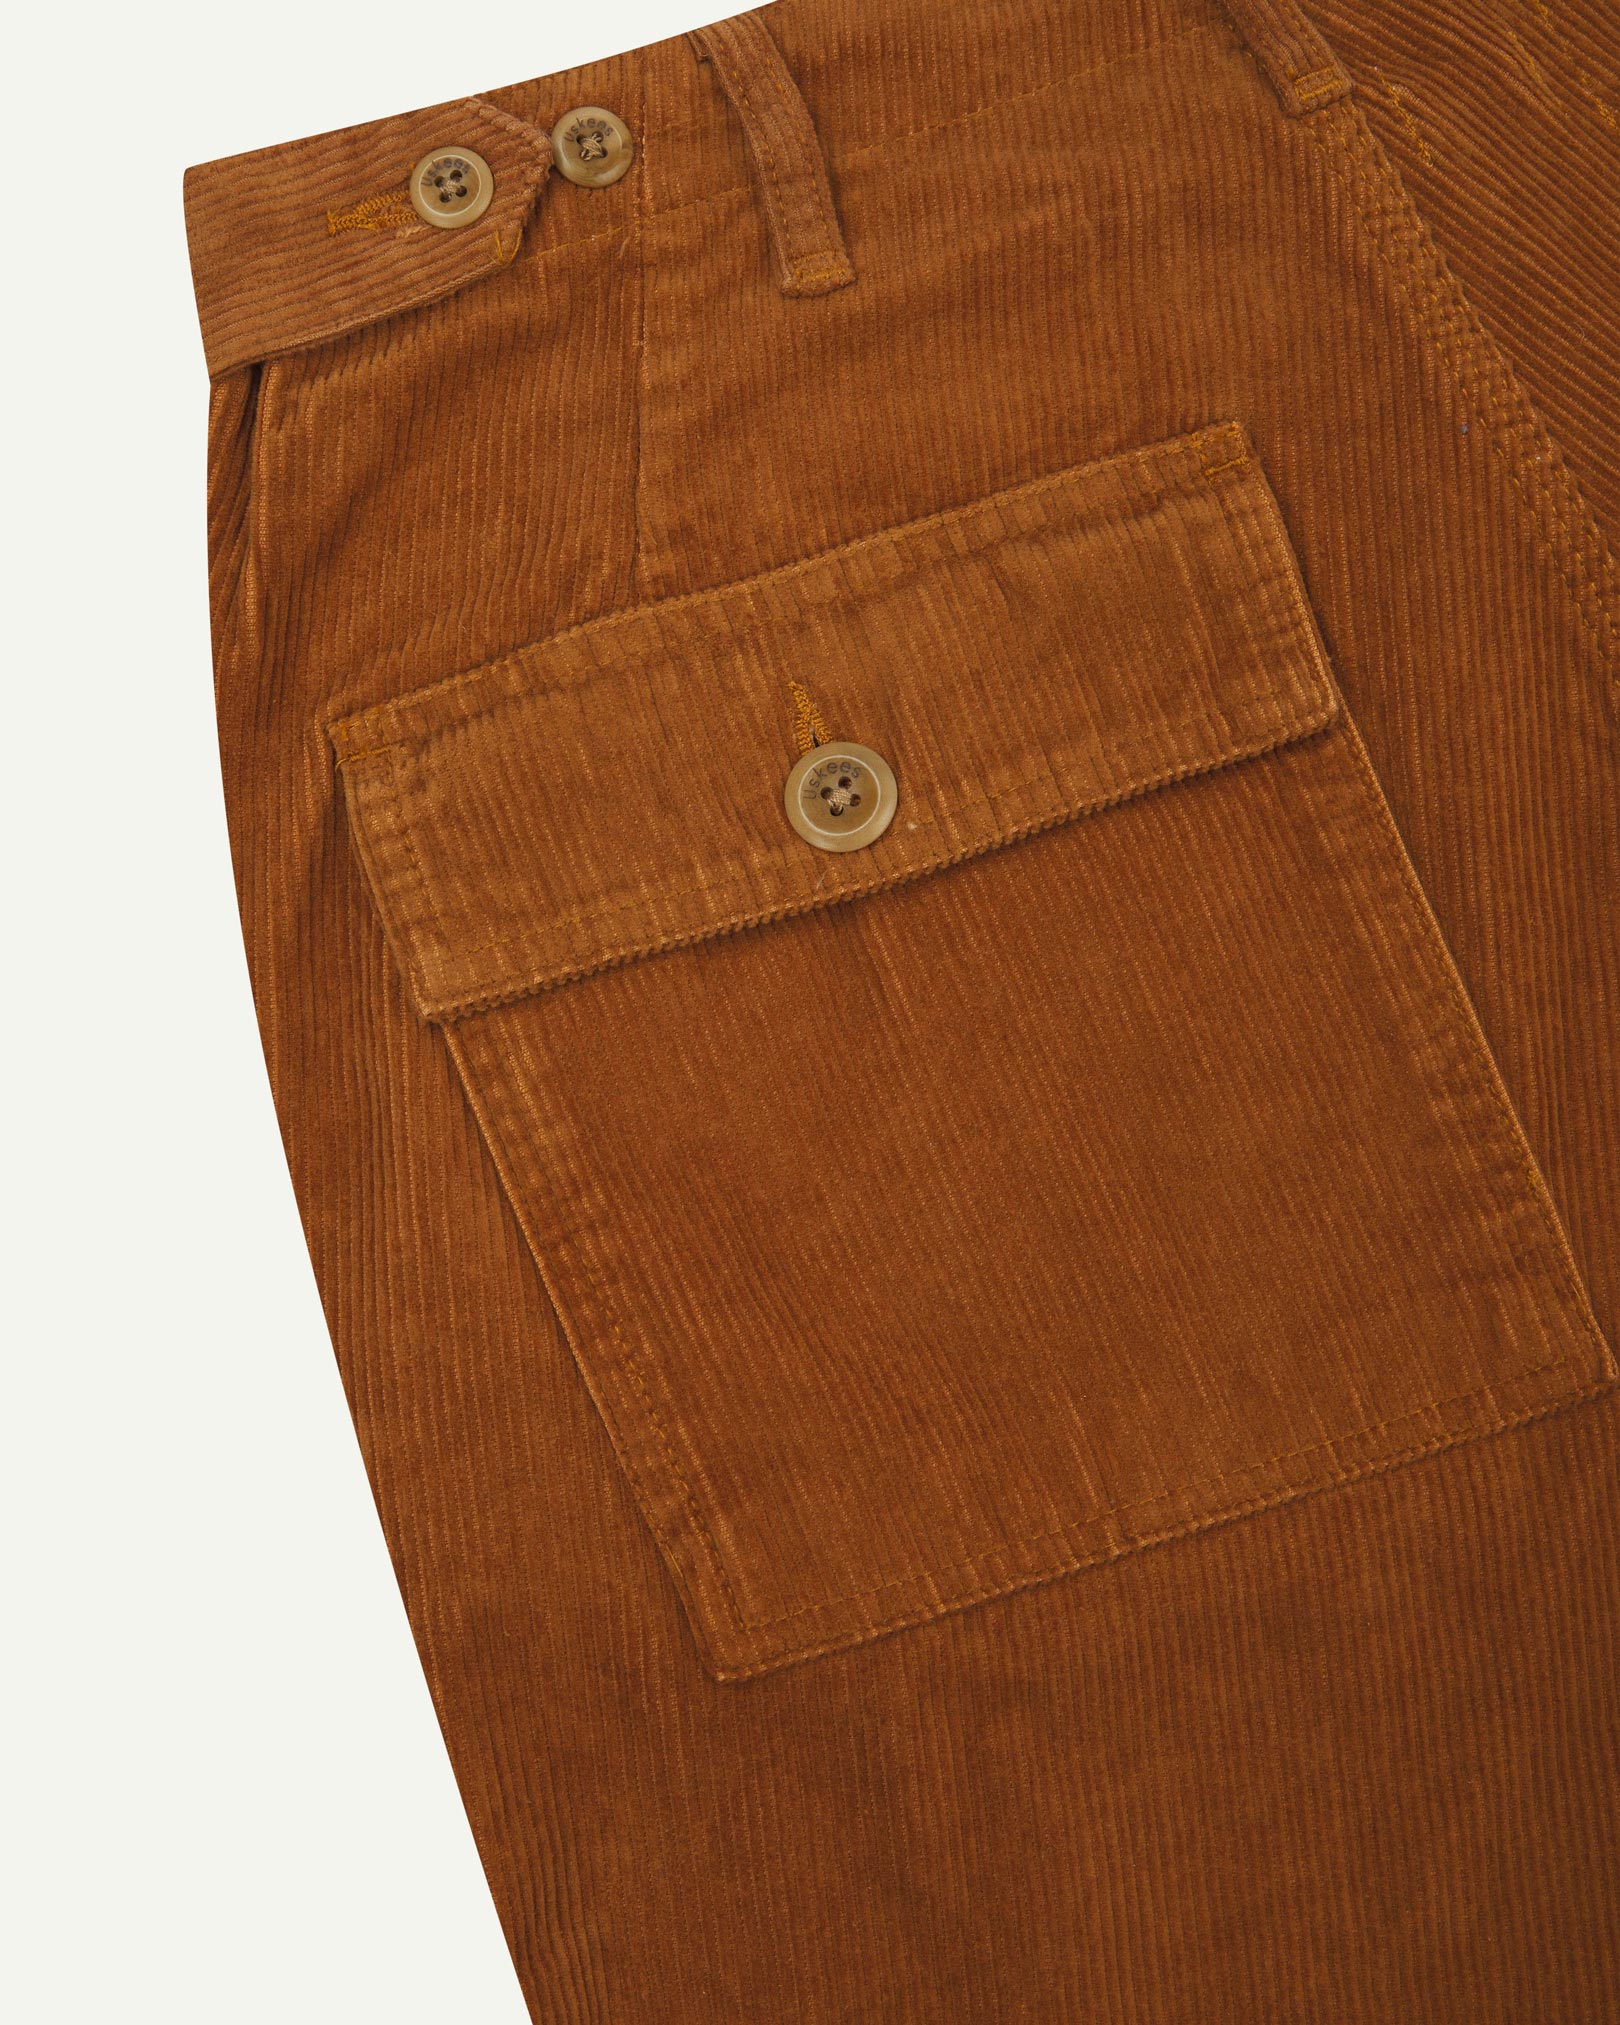 Close-up reverse view of Uskees tan corduroy work pants with focus on left rear pocket, belt loops, triple stitching and adjustable button waist.